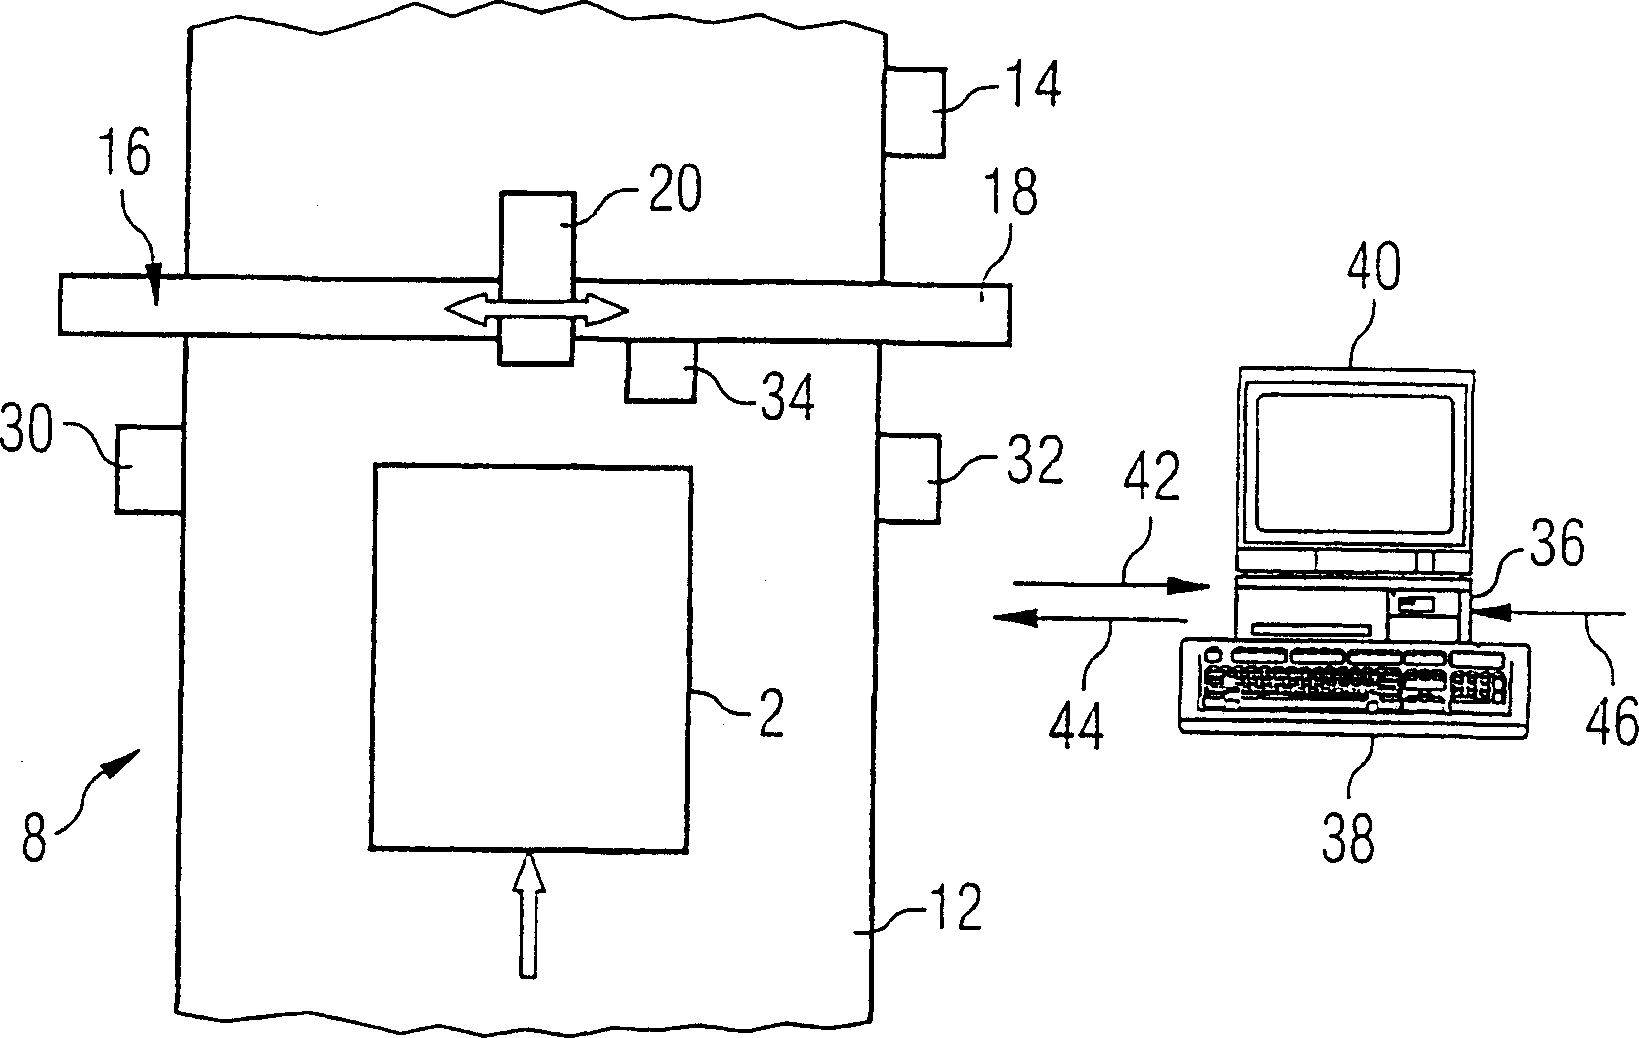 Method and system and device for producing components with pre-determained surface appearance, in particular for front panels of kitchen units